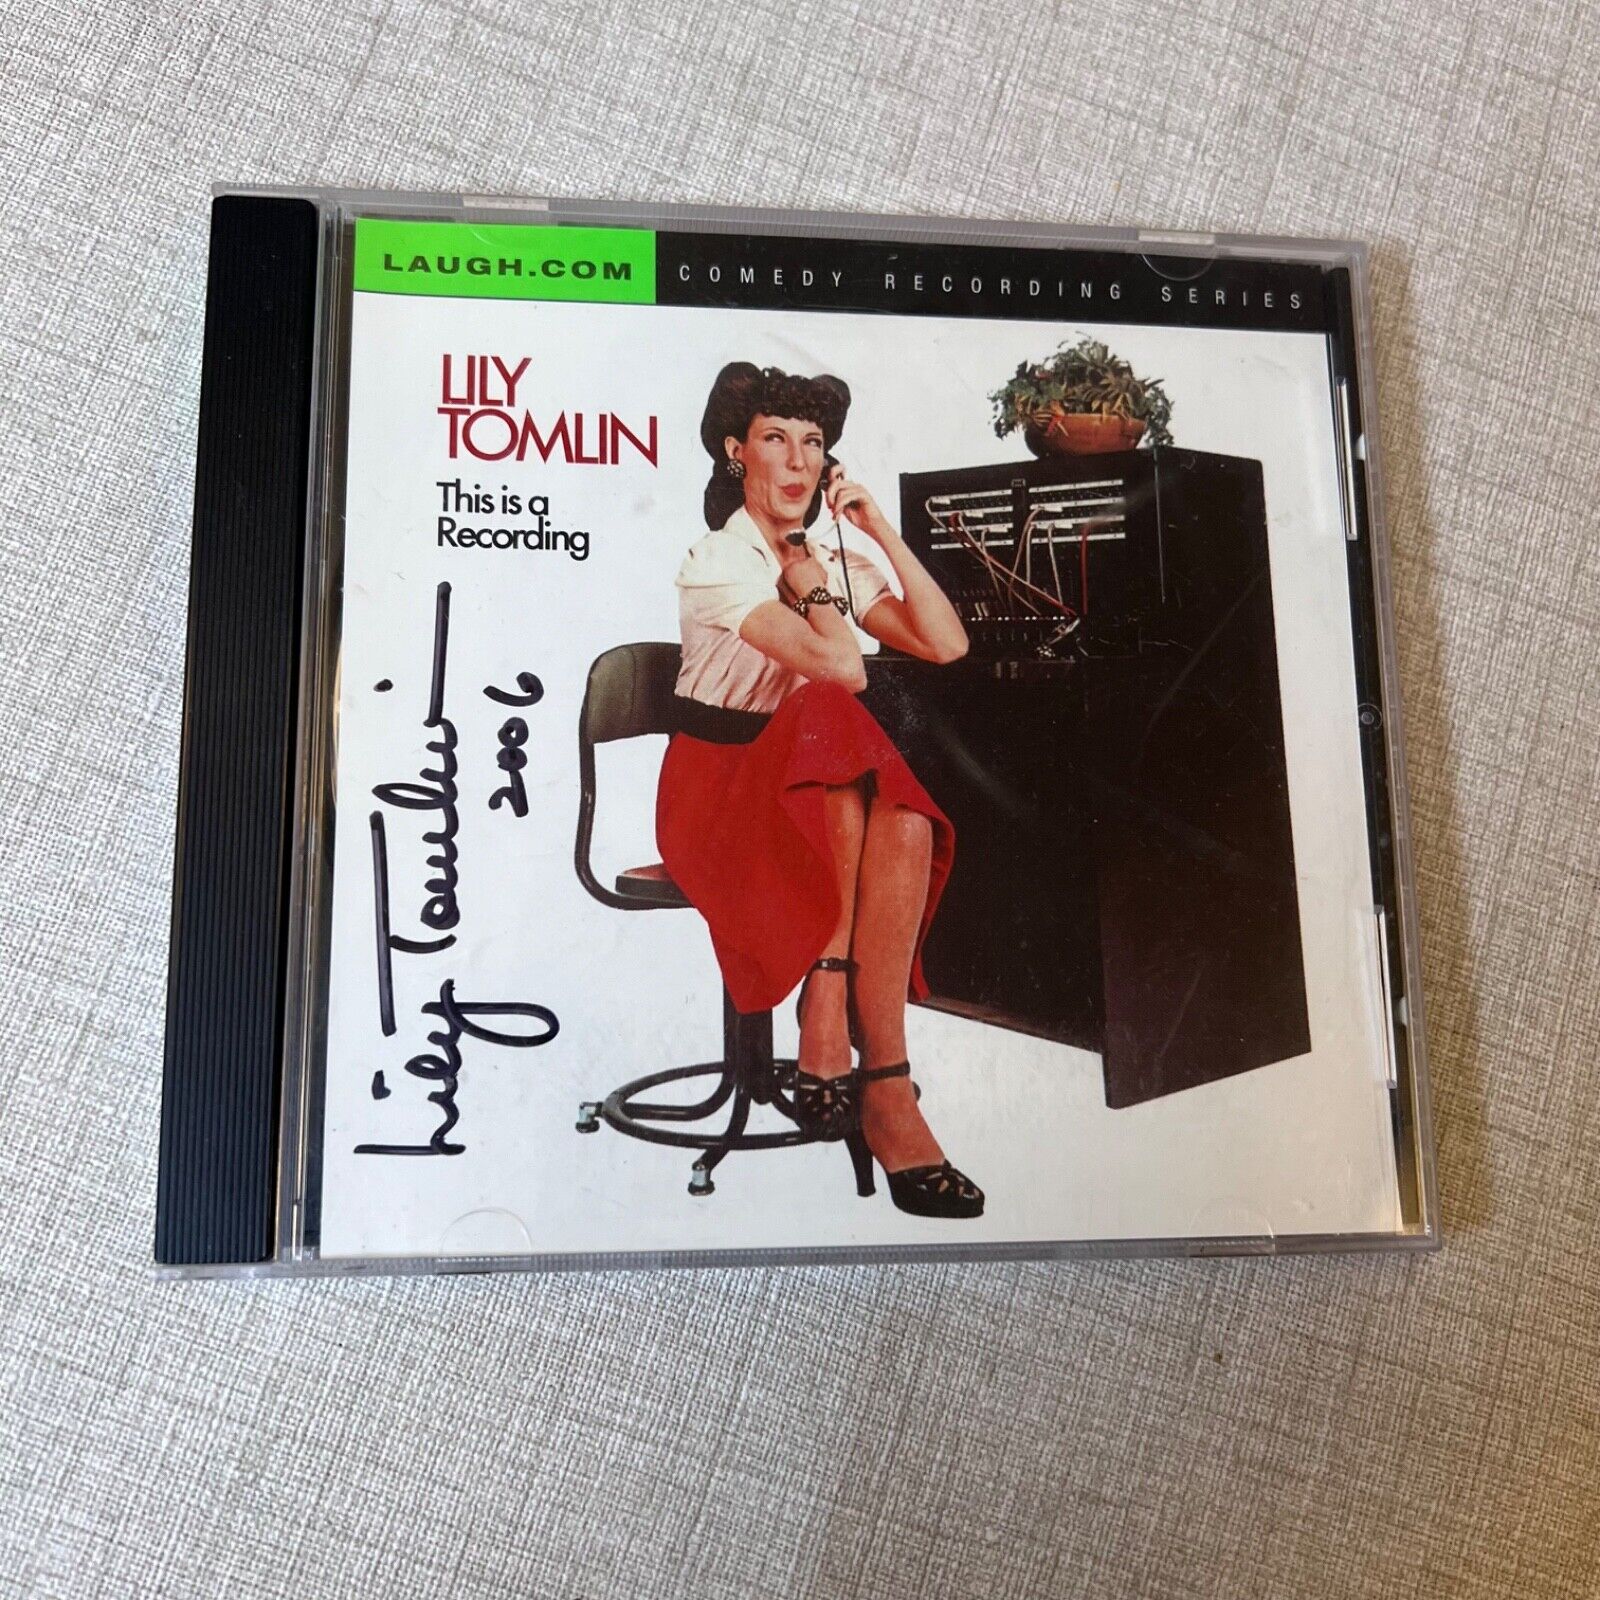 LILY TOMLIN THIS IS A RECORDING CD COMEDY NM 1971 2006 Signed W/ Show Ticket